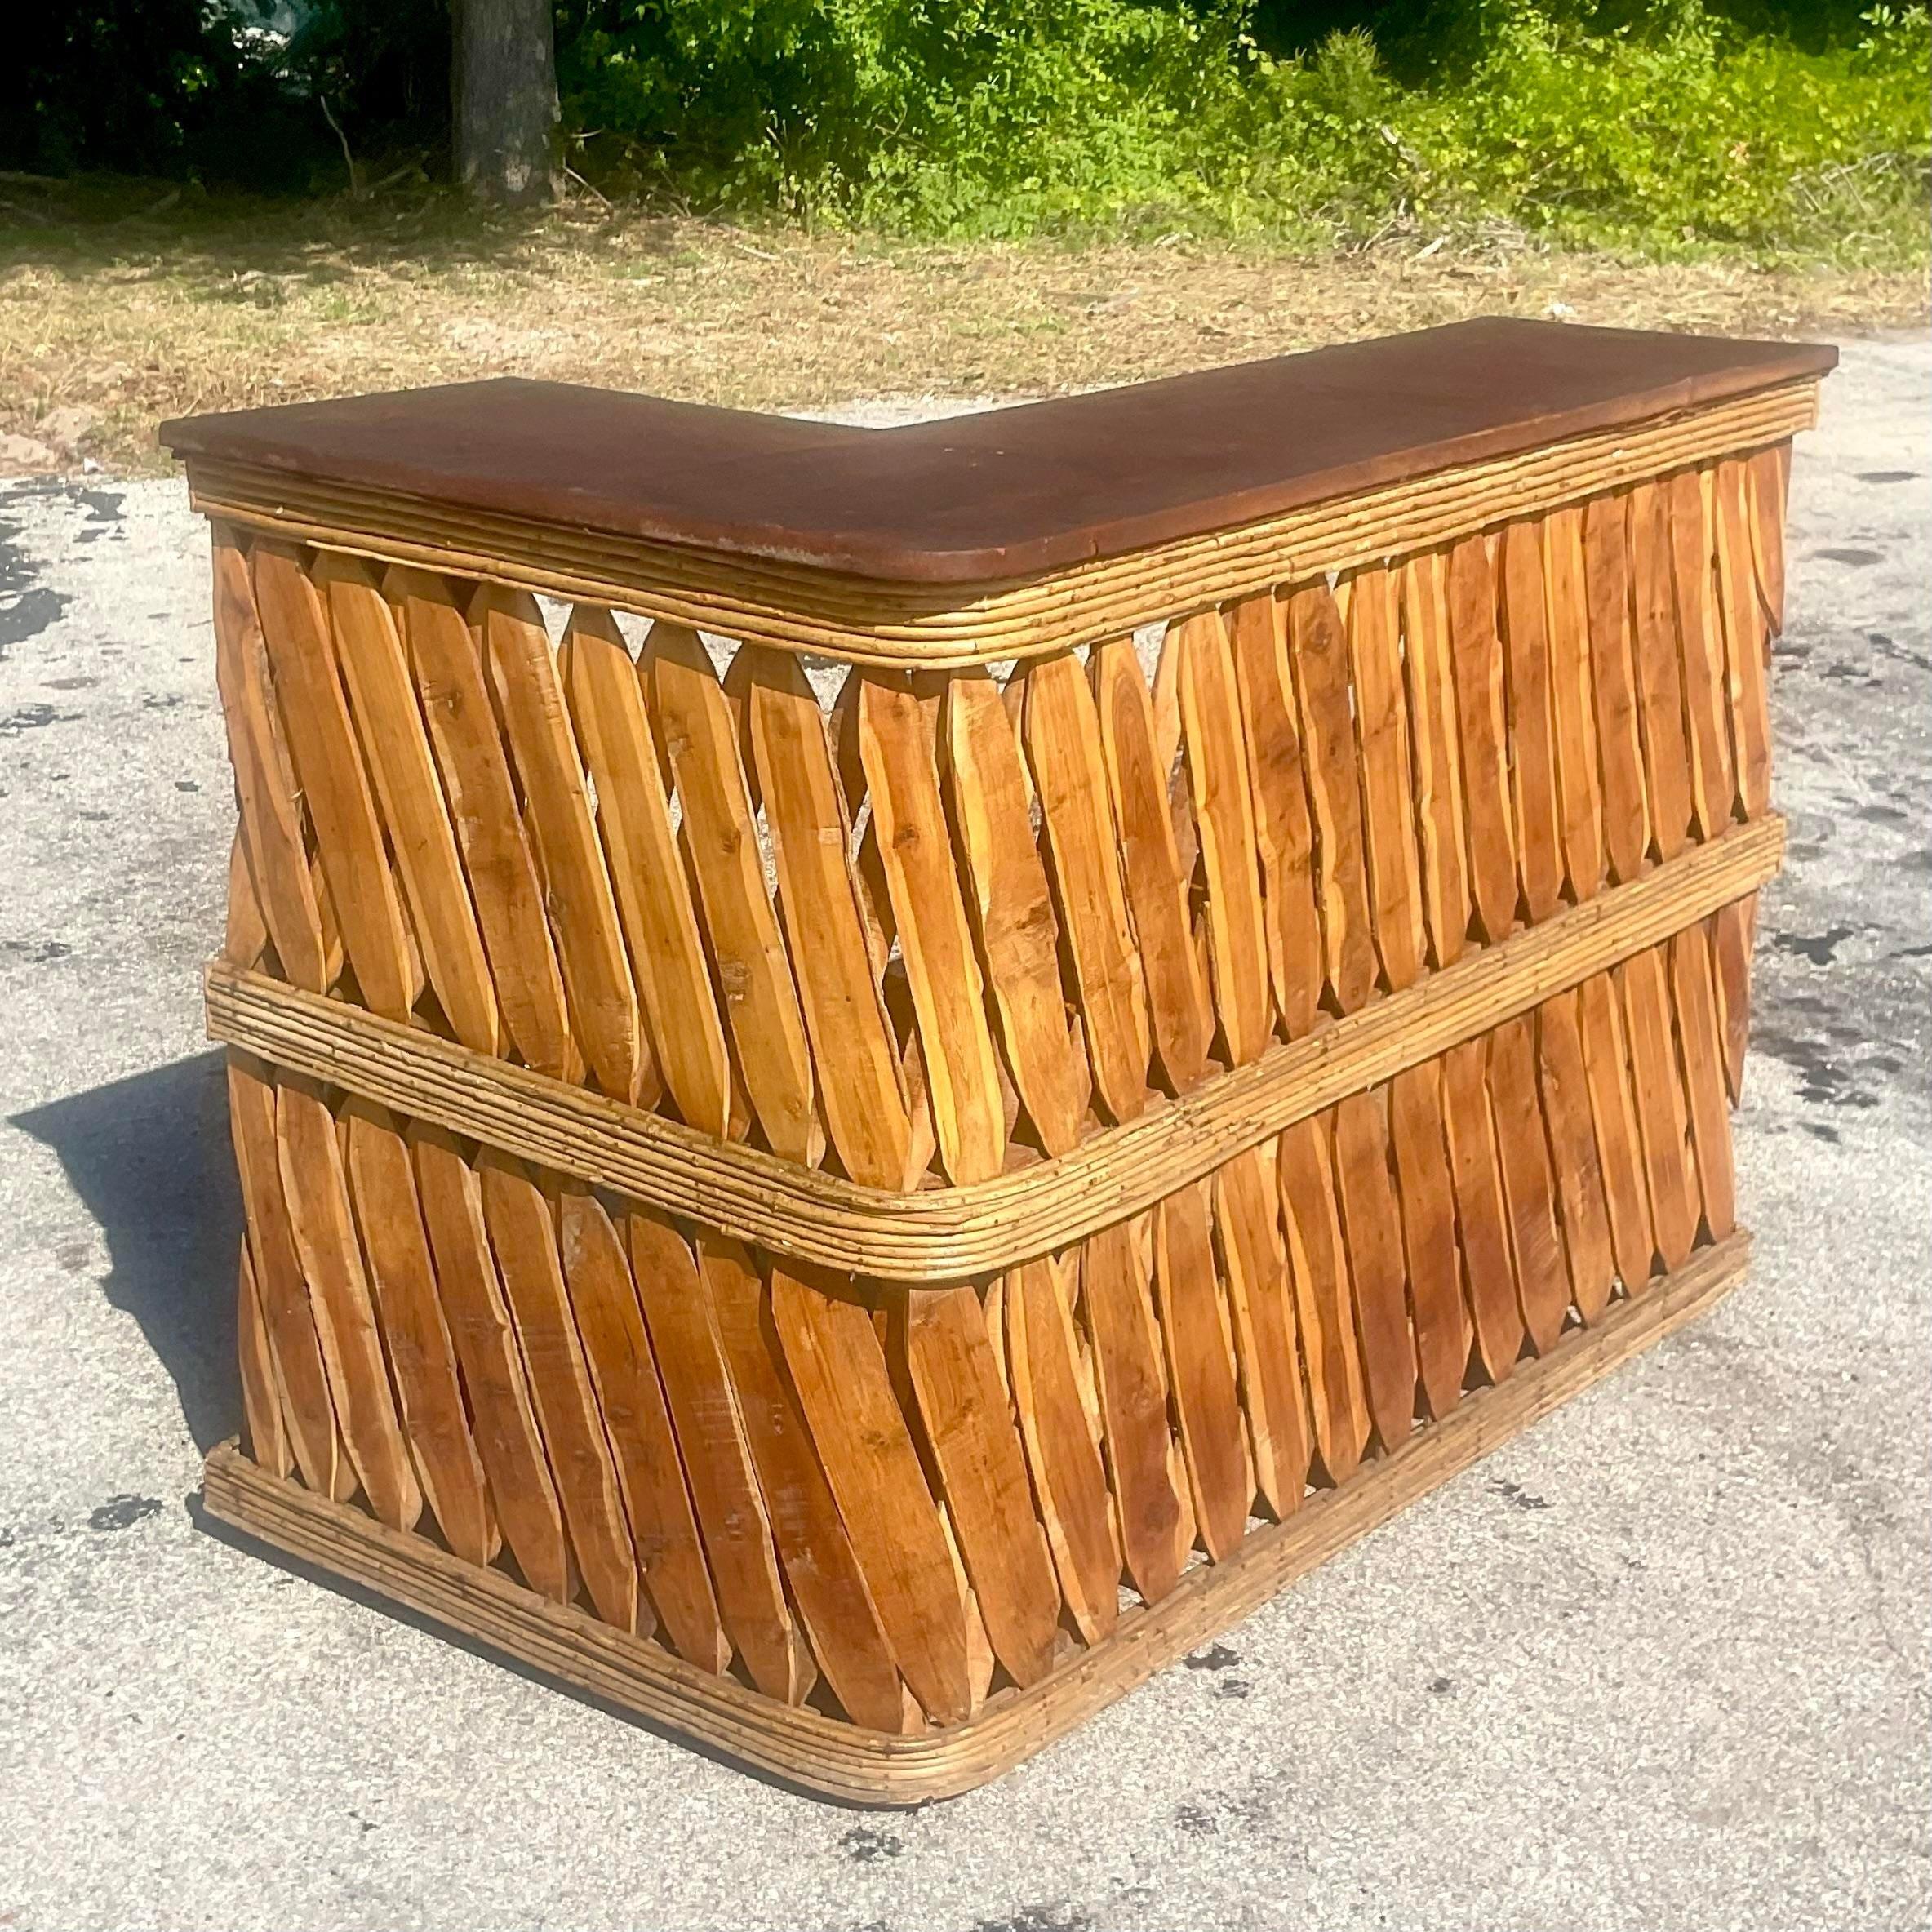 A fabulous vintage Boho Dry bar. The coveted Equipale style with cross hatched wood and bands of pencil reed. A chic pebbled leather top on an L shape. Acquired from a Palm Beach estate.